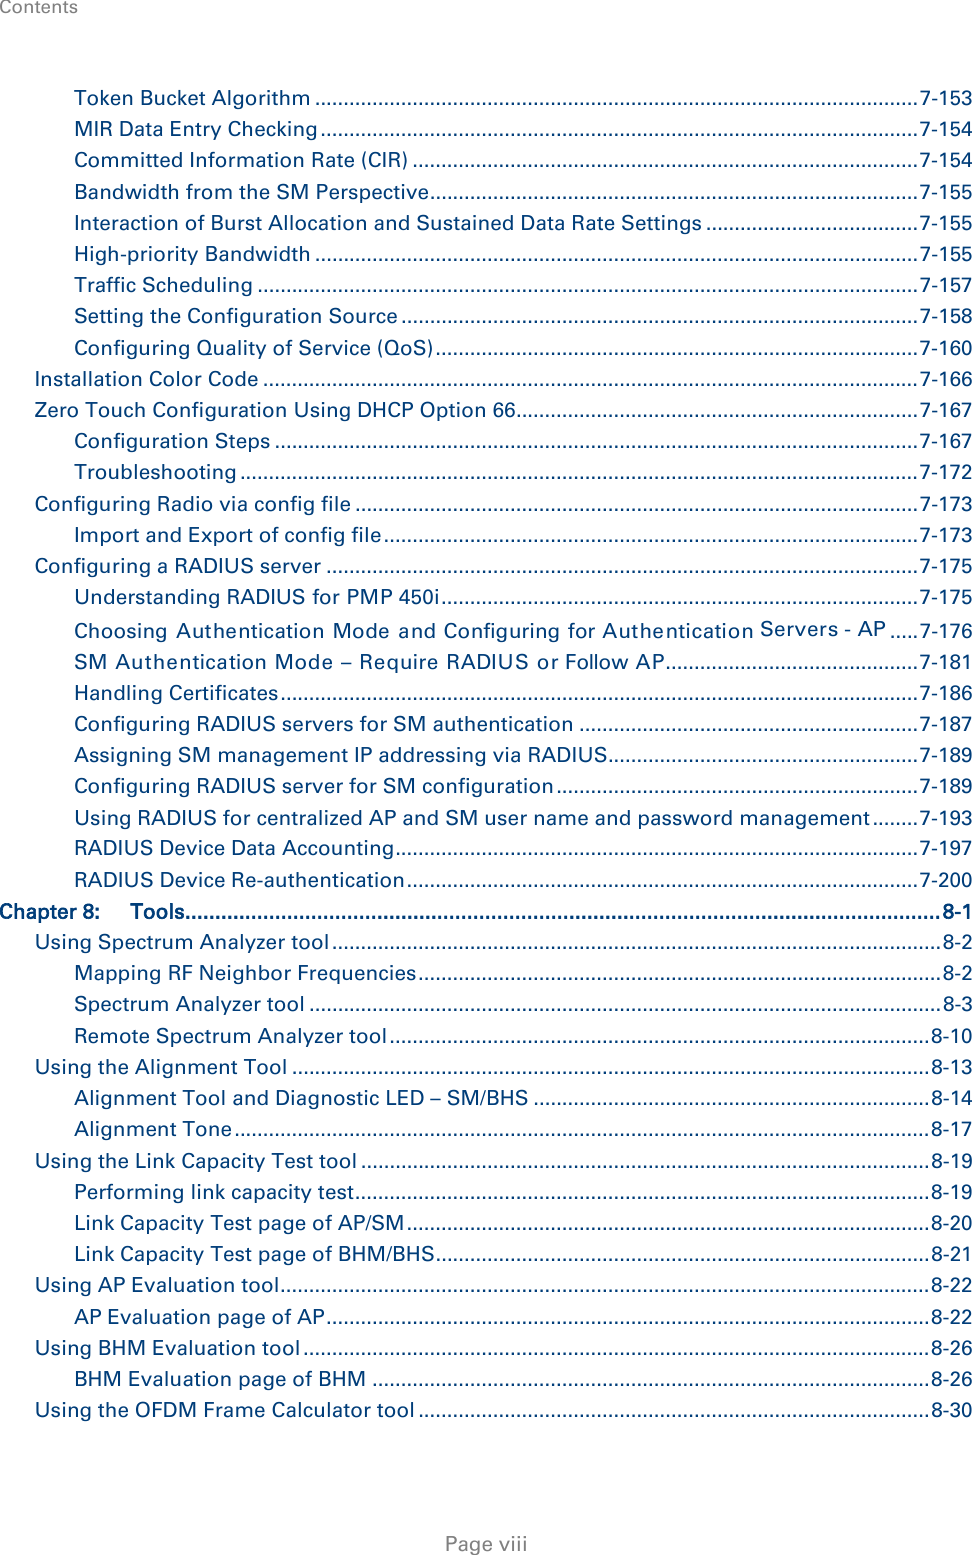 Contents     Page viii Token Bucket Algorithm ......................................................................................................... 7-153 MIR Data Entry Checking ........................................................................................................ 7-154 Committed Information Rate (CIR) ........................................................................................ 7-154 Bandwidth from the SM Perspective ..................................................................................... 7-155 Interaction of Burst Allocation and Sustained Data Rate Settings ..................................... 7-155 High-priority Bandwidth ......................................................................................................... 7-155 Traffic Scheduling ................................................................................................................... 7-157 Setting the Configuration Source .......................................................................................... 7-158 Configuring Quality of Service (QoS) .................................................................................... 7-160 Installation Color Code .................................................................................................................. 7-166 Zero Touch Configuration Using DHCP Option 66...................................................................... 7-167 Configuration Steps ................................................................................................................ 7-167 Troubleshooting ...................................................................................................................... 7-172 Configuring Radio via config file .................................................................................................. 7-173 Import and Export of config file ............................................................................................. 7-173 Configuring a RADIUS server ....................................................................................................... 7-175 Understanding RADIUS for PMP 450i ................................................................................... 7-175 Choosing Authentication Mode and Configuring for Authentication Servers - AP ..... 7-176 SM Authentication Mode – Require RADIUS or Follow AP ............................................ 7-181 Handling Certificates ............................................................................................................... 7-186 Configuring RADIUS servers for SM authentication ........................................................... 7-187 Assigning SM management IP addressing via RADIUS ...................................................... 7-189 Configuring RADIUS server for SM configuration ............................................................... 7-189 Using RADIUS for centralized AP and SM user name and password management ........ 7-193 RADIUS Device Data Accounting ........................................................................................... 7-197 RADIUS Device Re-authentication ......................................................................................... 7-200 Chapter 8: Tools .............................................................................................................................. 8-1 Using Spectrum Analyzer tool .......................................................................................................... 8-2 Mapping RF Neighbor Frequencies ........................................................................................... 8-2 Spectrum Analyzer tool .............................................................................................................. 8-3 Remote Spectrum Analyzer tool .............................................................................................. 8-10 Using the Alignment Tool ............................................................................................................... 8-13 Alignment Tool and Diagnostic LED – SM/BHS ..................................................................... 8-14 Alignment Tone ......................................................................................................................... 8-17 Using the Link Capacity Test tool ................................................................................................... 8-19 Performing link capacity test .................................................................................................... 8-19 Link Capacity Test page of AP/SM ........................................................................................... 8-20 Link Capacity Test page of BHM/BHS ...................................................................................... 8-21 Using AP Evaluation tool ................................................................................................................. 8-22 AP Evaluation page of AP ......................................................................................................... 8-22 Using BHM Evaluation tool ............................................................................................................. 8-26 BHM Evaluation page of BHM ................................................................................................. 8-26 Using the OFDM Frame Calculator tool ......................................................................................... 8-30 